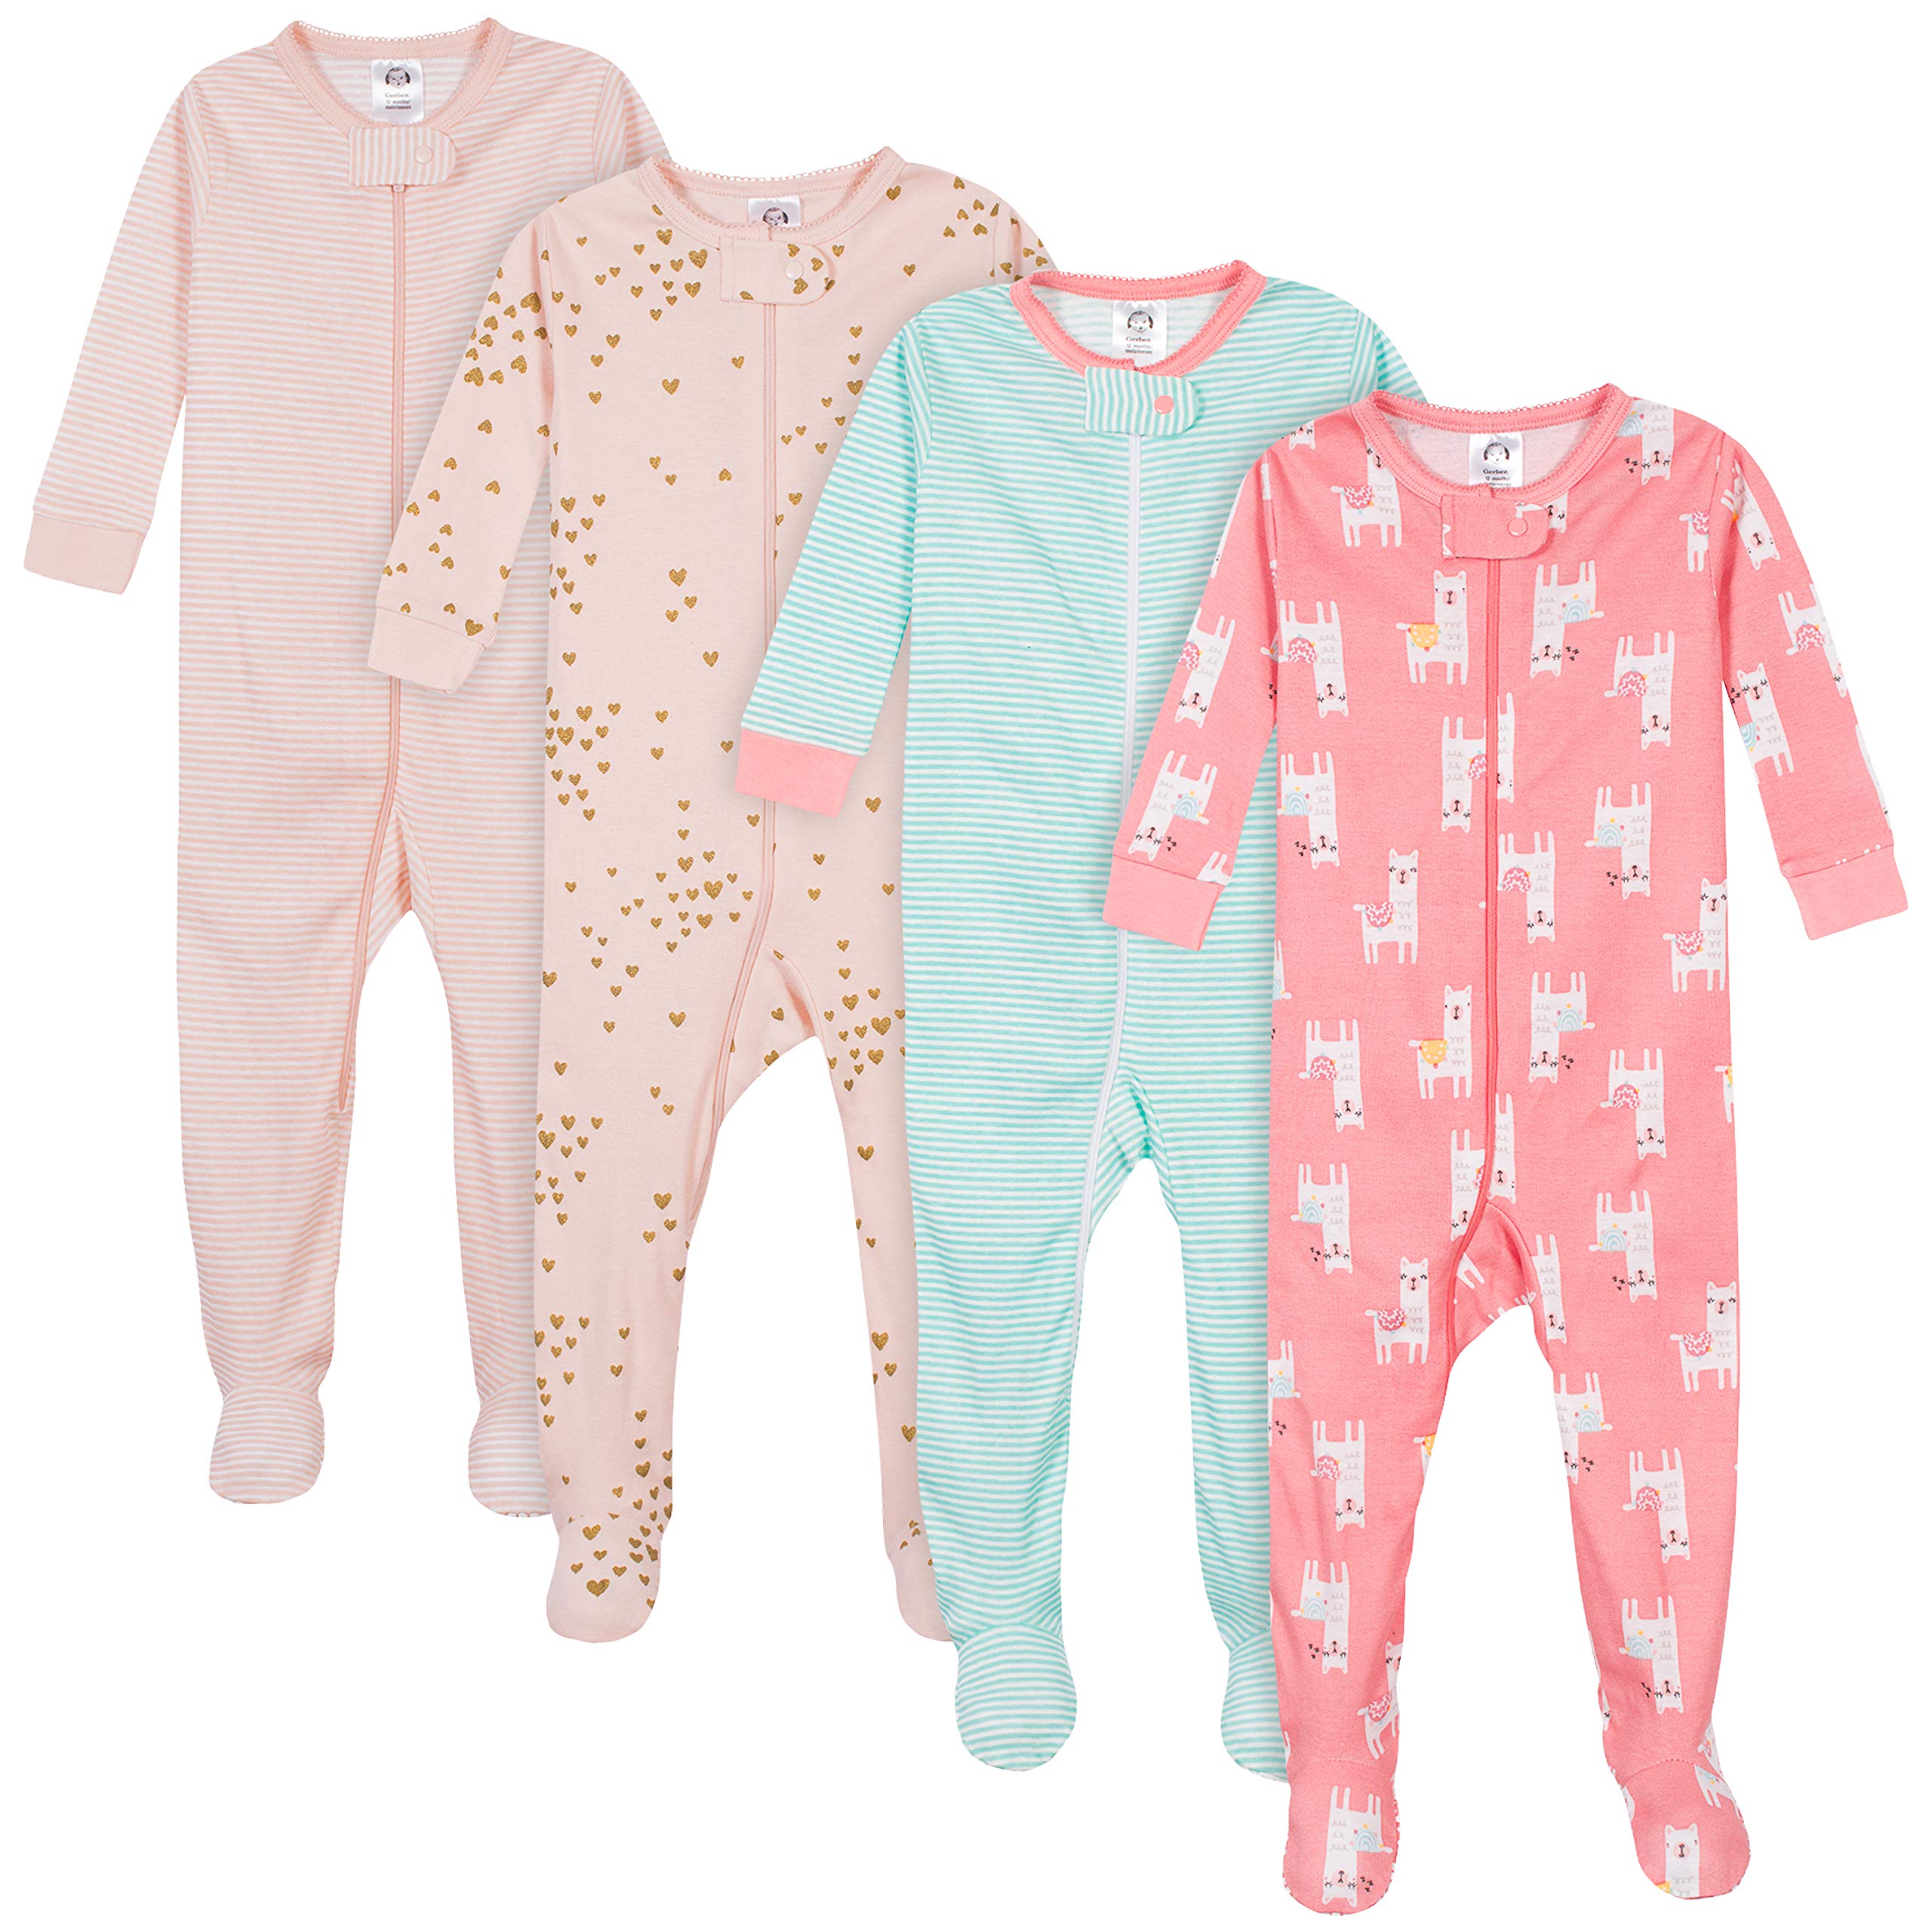 Gerber baby-girls 4-pack Footed Pajamas - Closeout